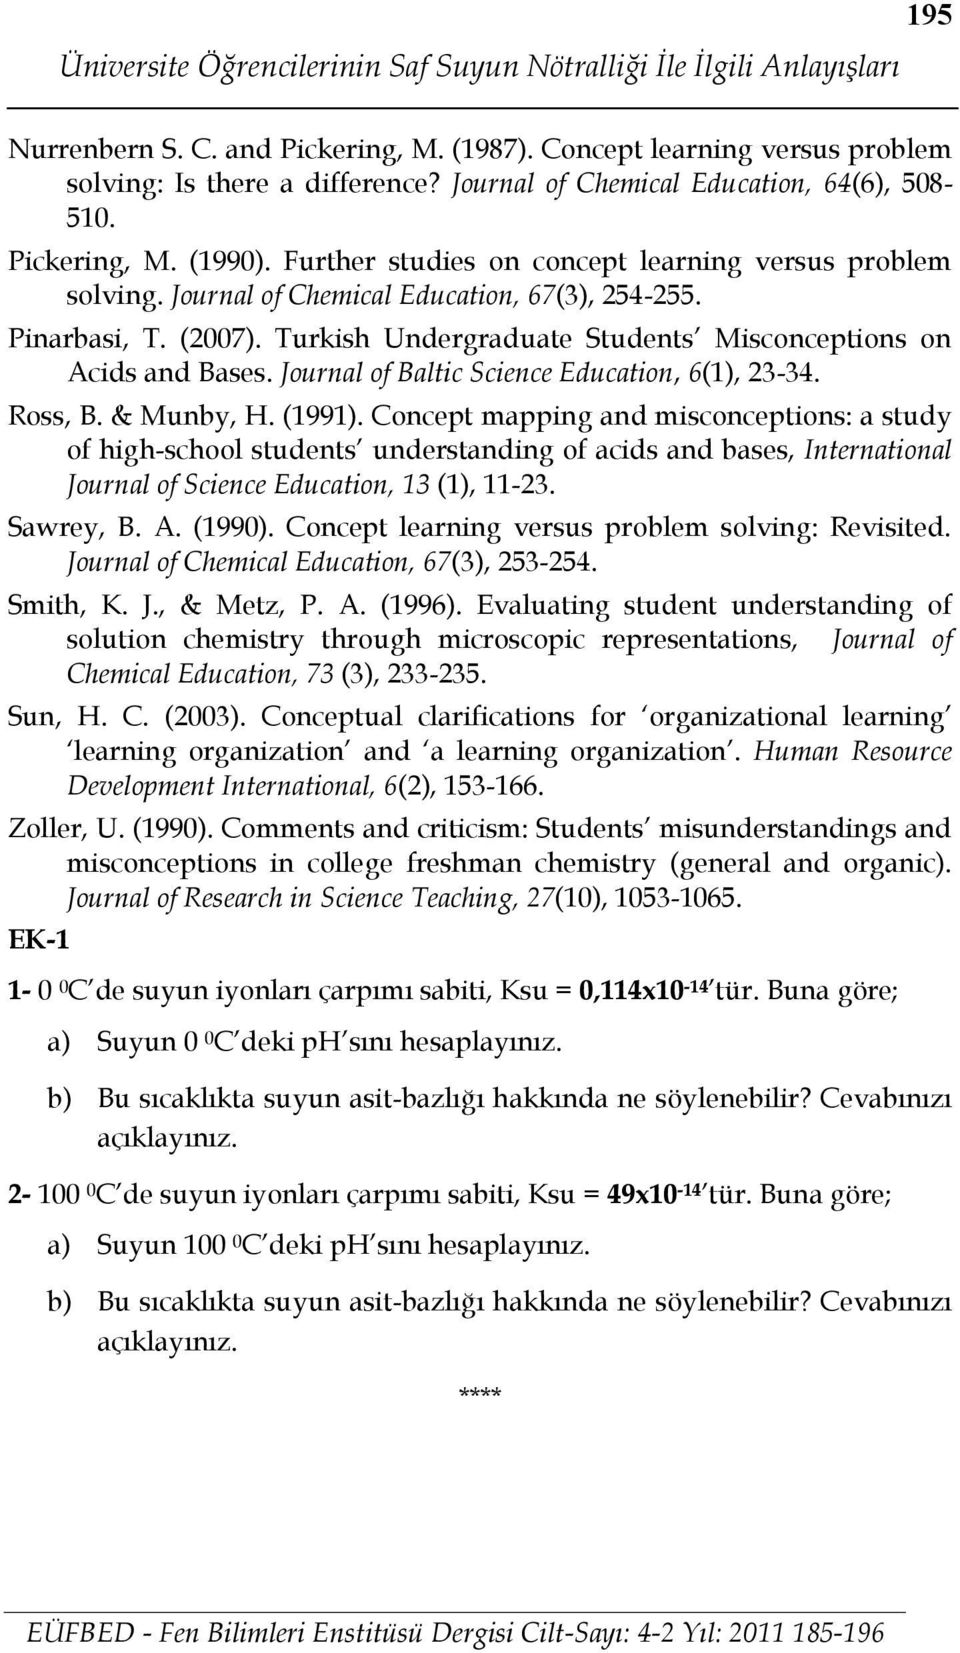 Turkish Unde rgraduate Students Misconceptions on Acids and Bases. Journal of Baltic Science Education, 6(1), 23-34. Ross, B. & Munby, H. (1991).